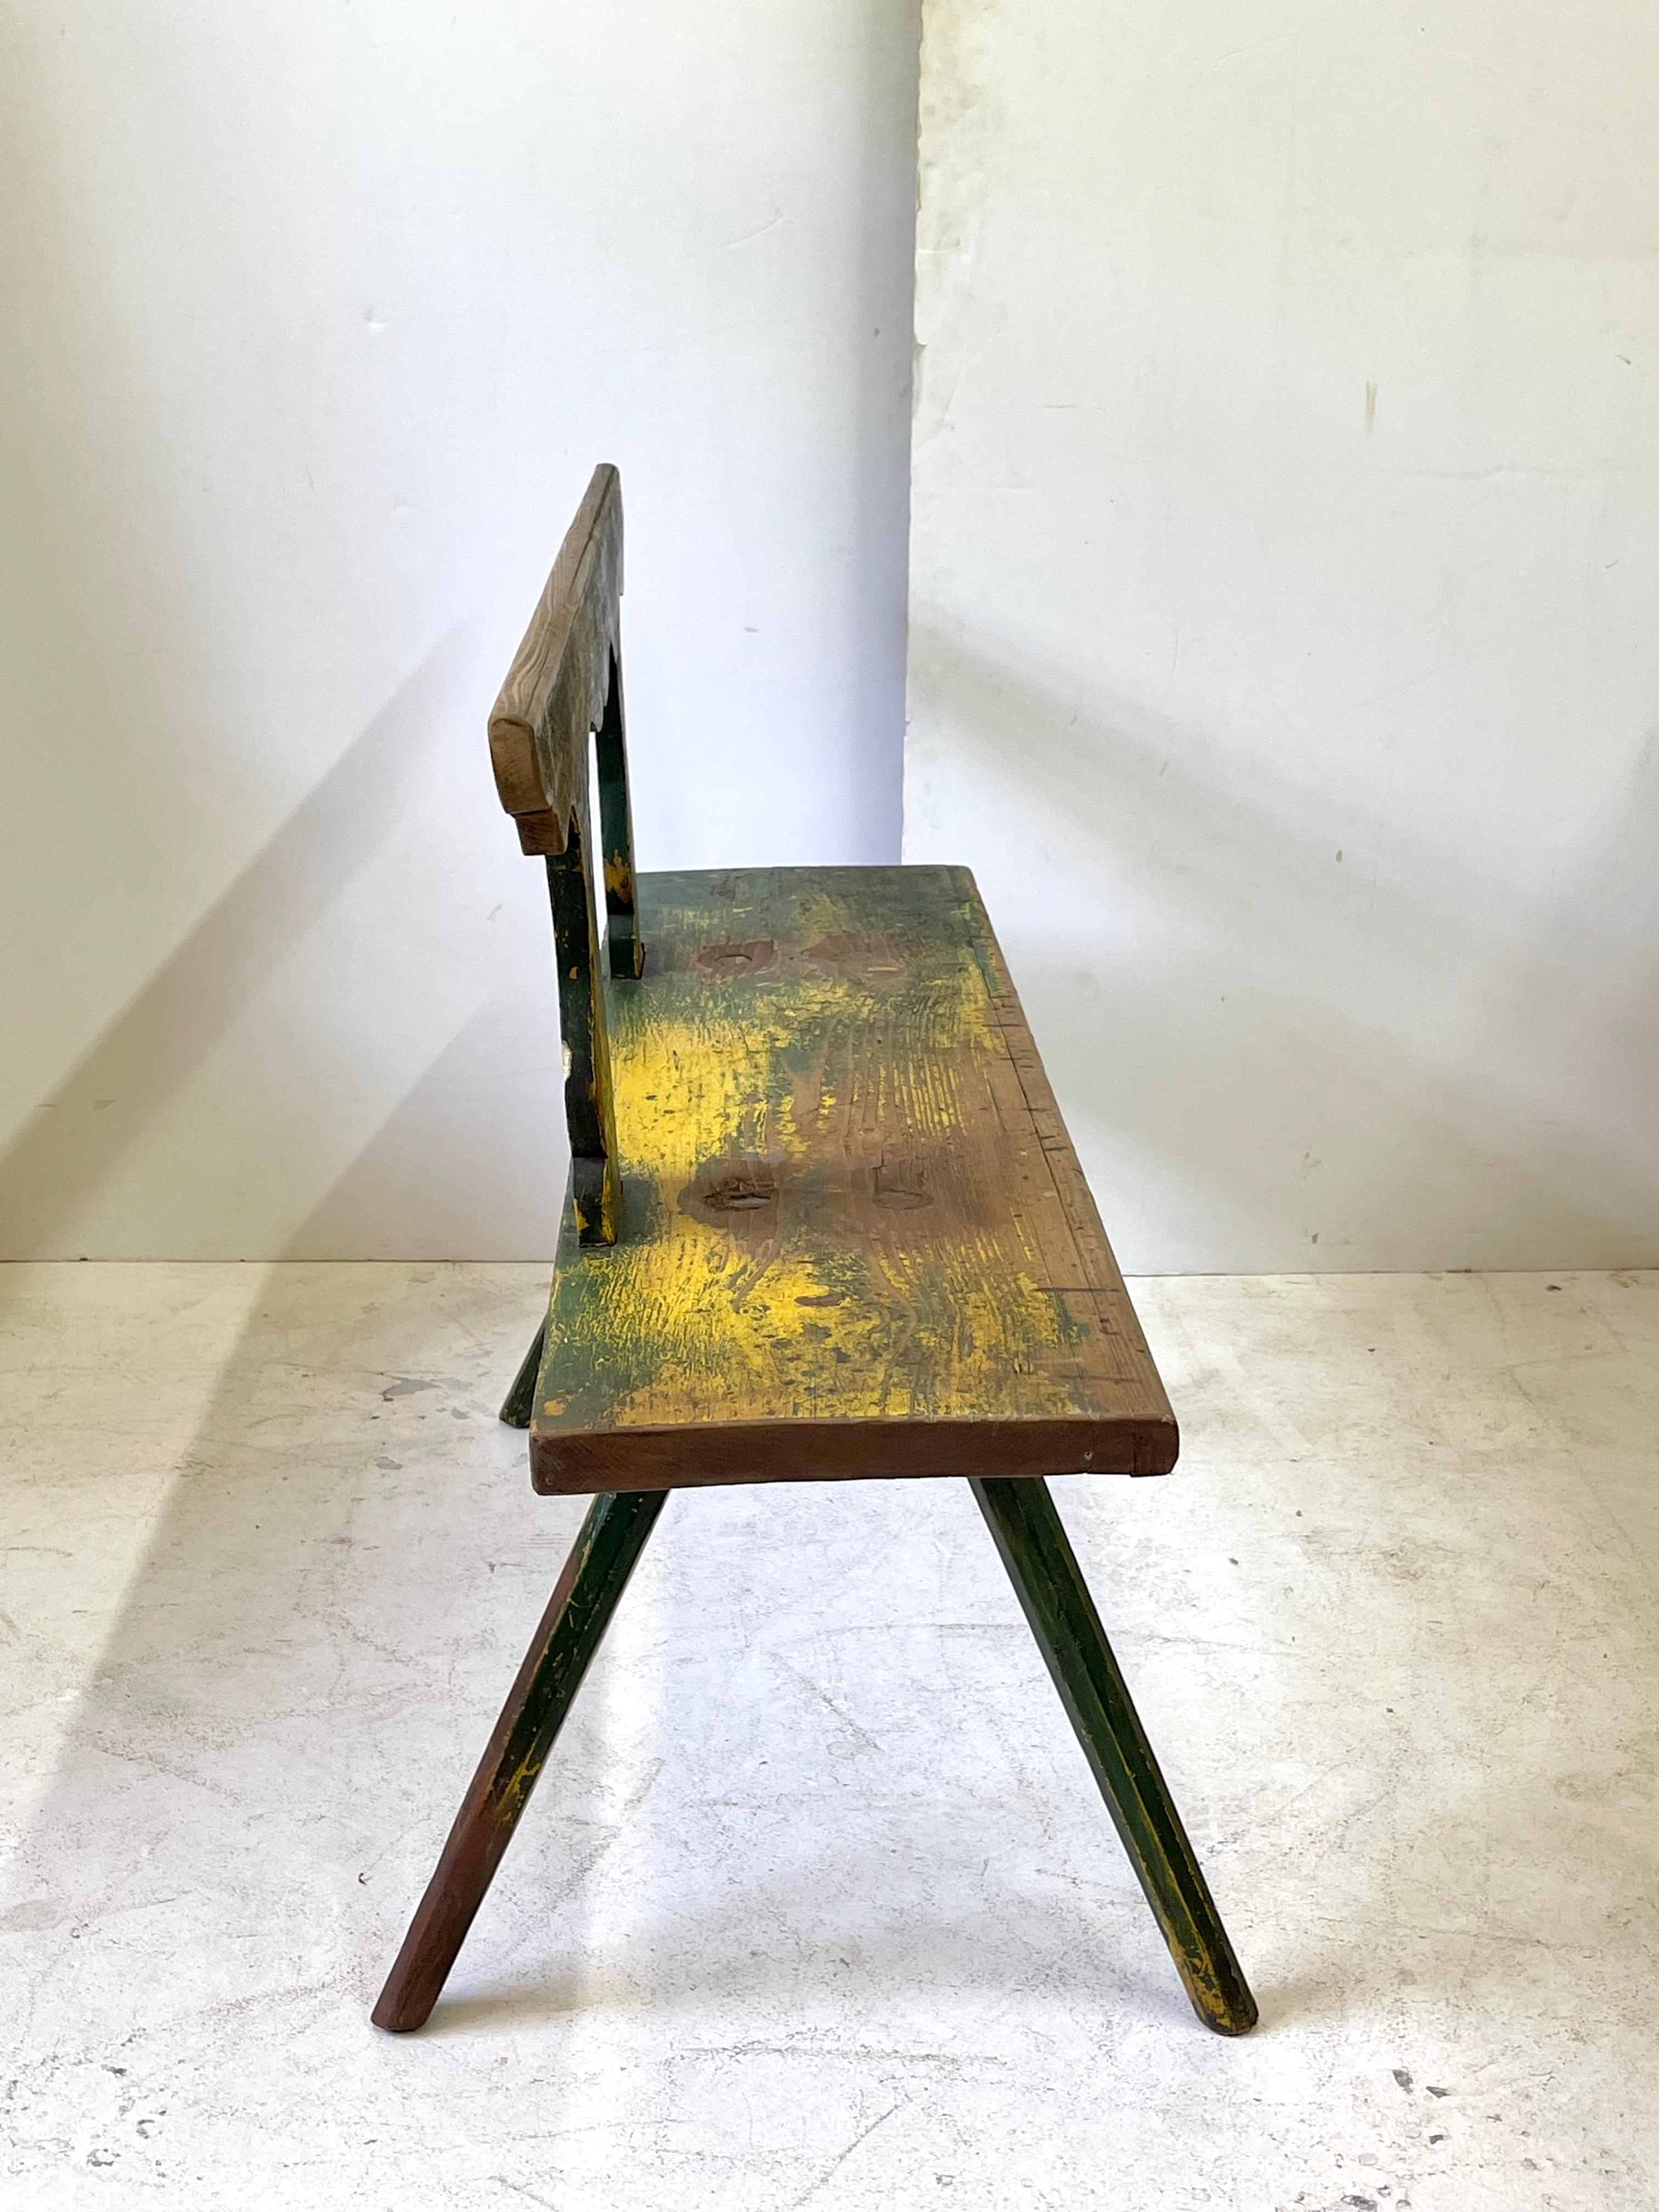 Wood 19th Century Rustic Italian Bench in Green and Yellow Paint